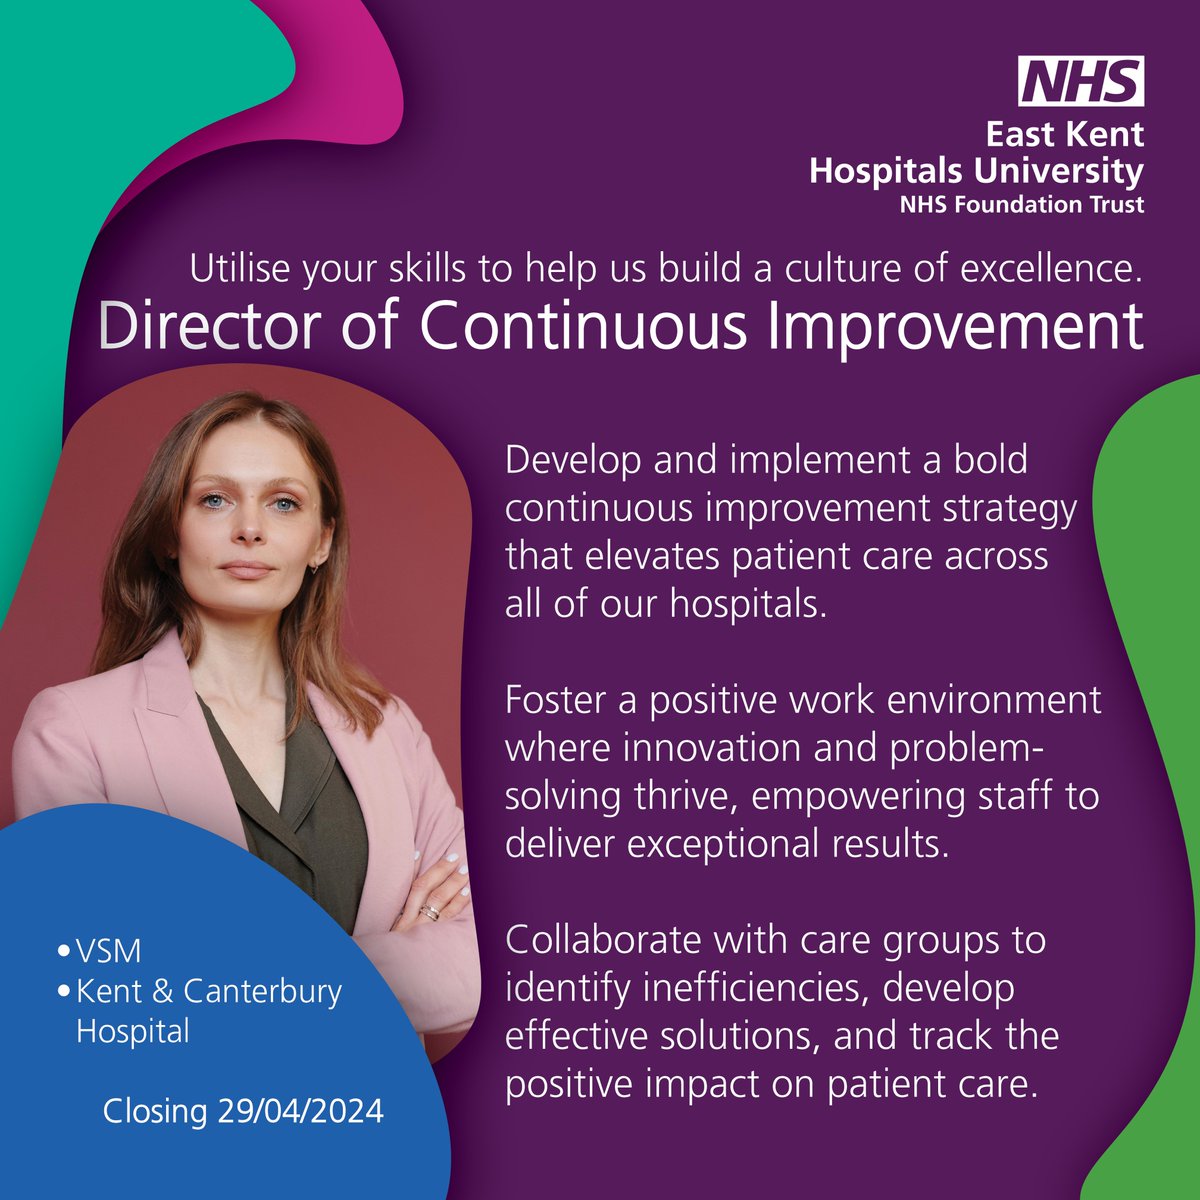 We're seeking a Director of Continuous Improvement to help lead EKHUFT to excellence! 💡 We're looking for someone to champion continuous improvement and efficiency, implement innovative solutions, and drive measurable results across our organisation. orlo.uk/DCI_4NBhR